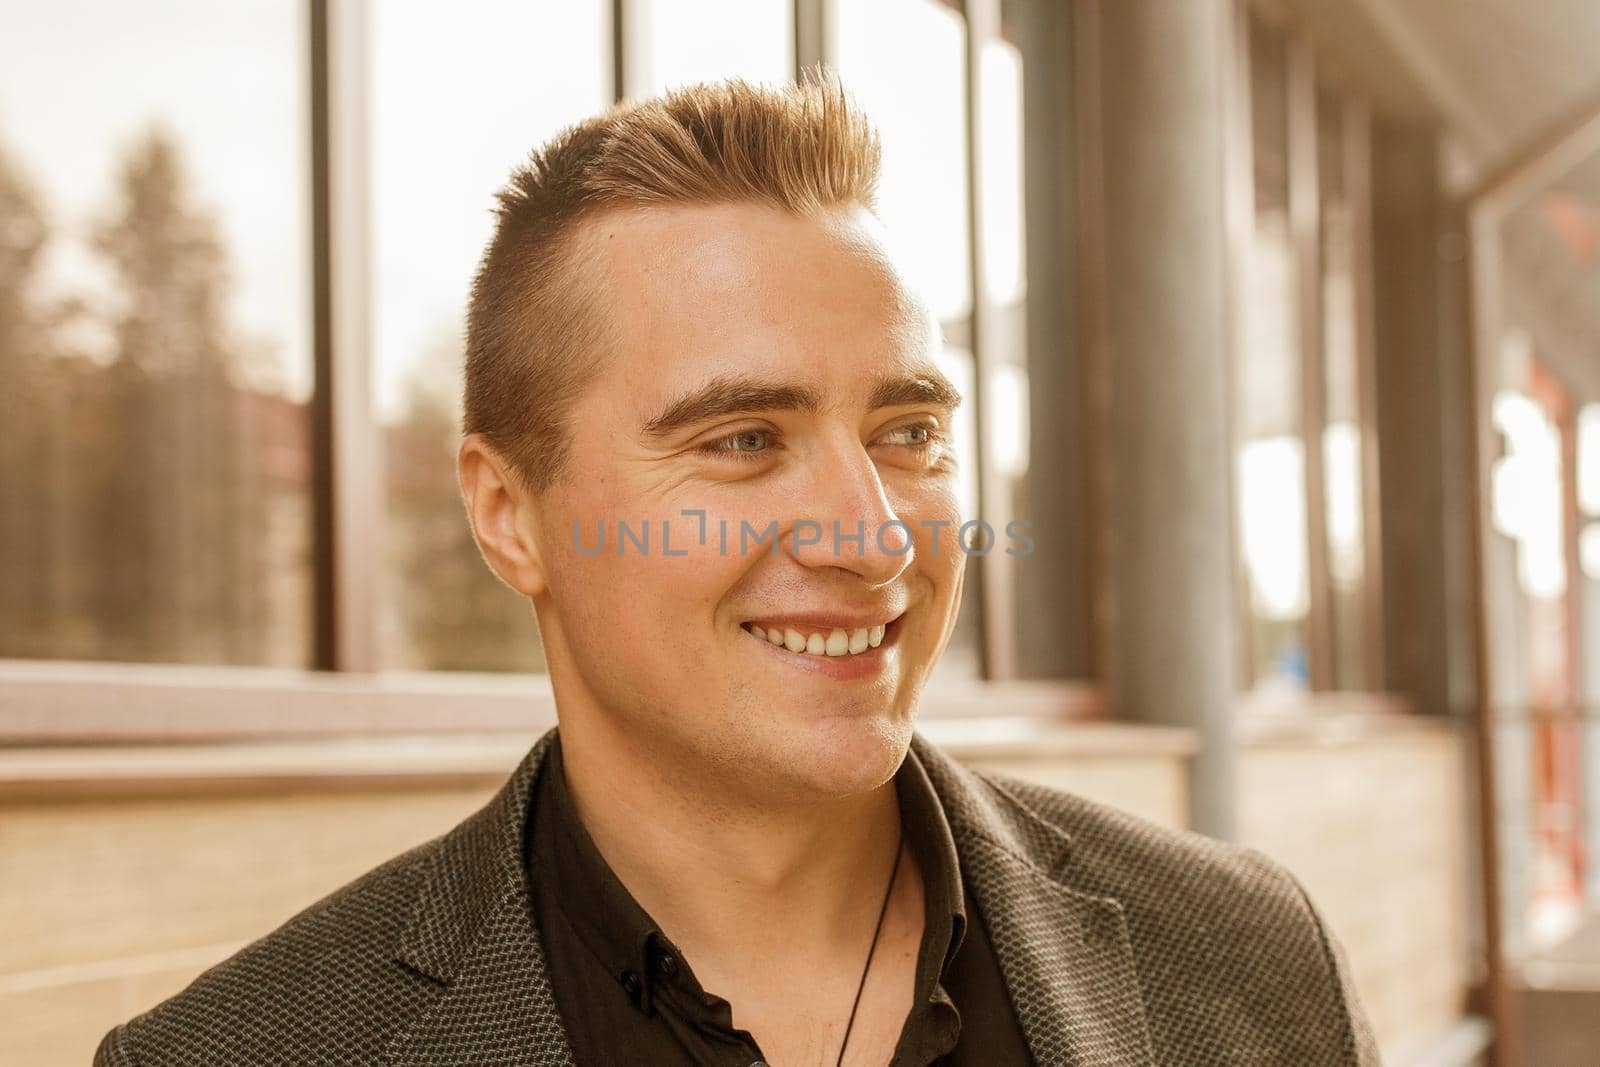 Close-up portrait of a positive smiling handsome guy of Caucasian appearance in a gray jacket and black shirt on the street outdoor.